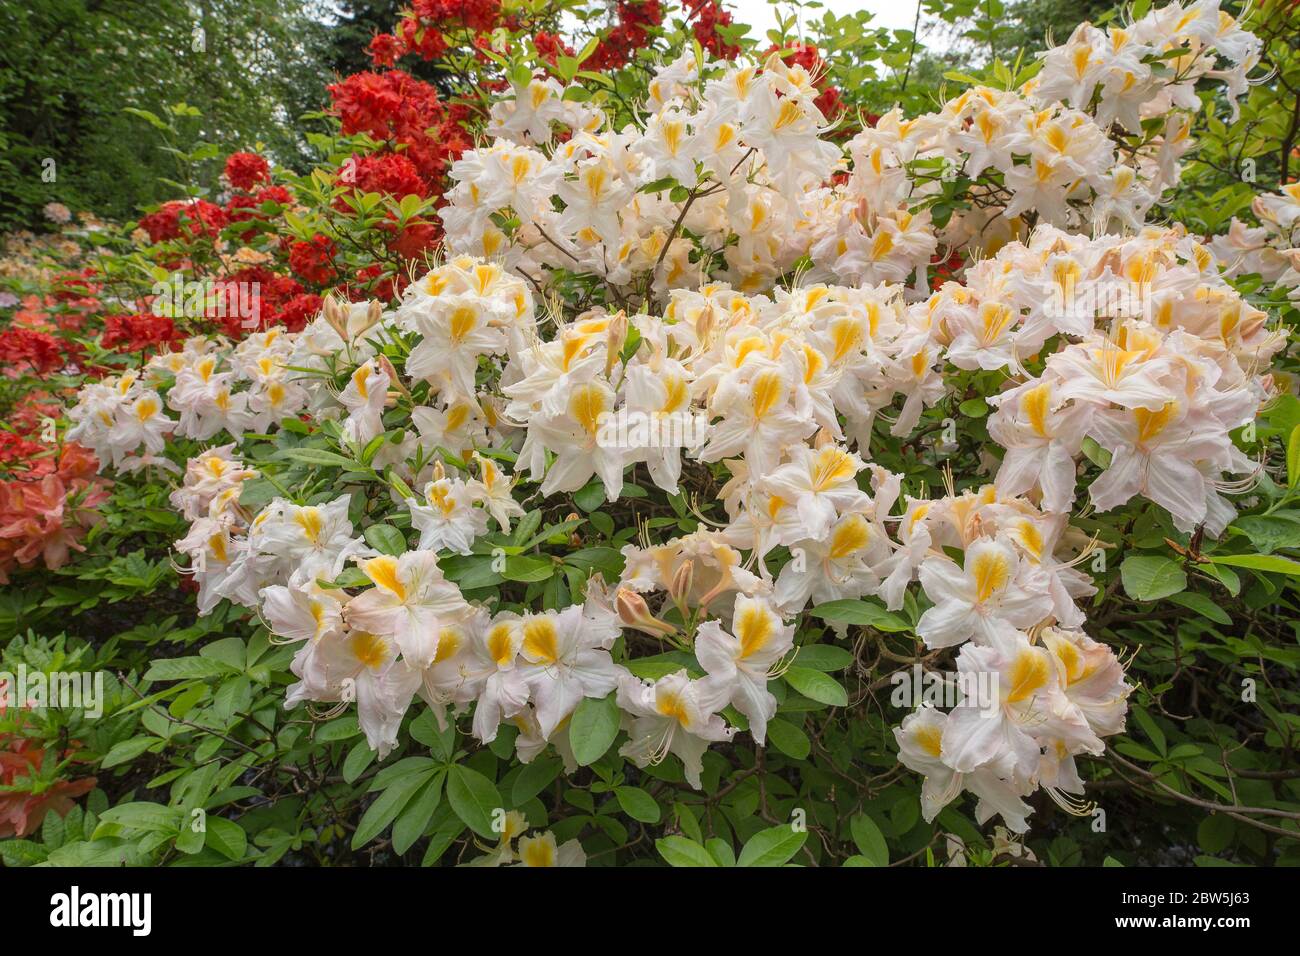 Blooming white and yellow rhododendron in VanDusen Botanical Garden, Vancouver, British Columbia, Canada. Stock Photo